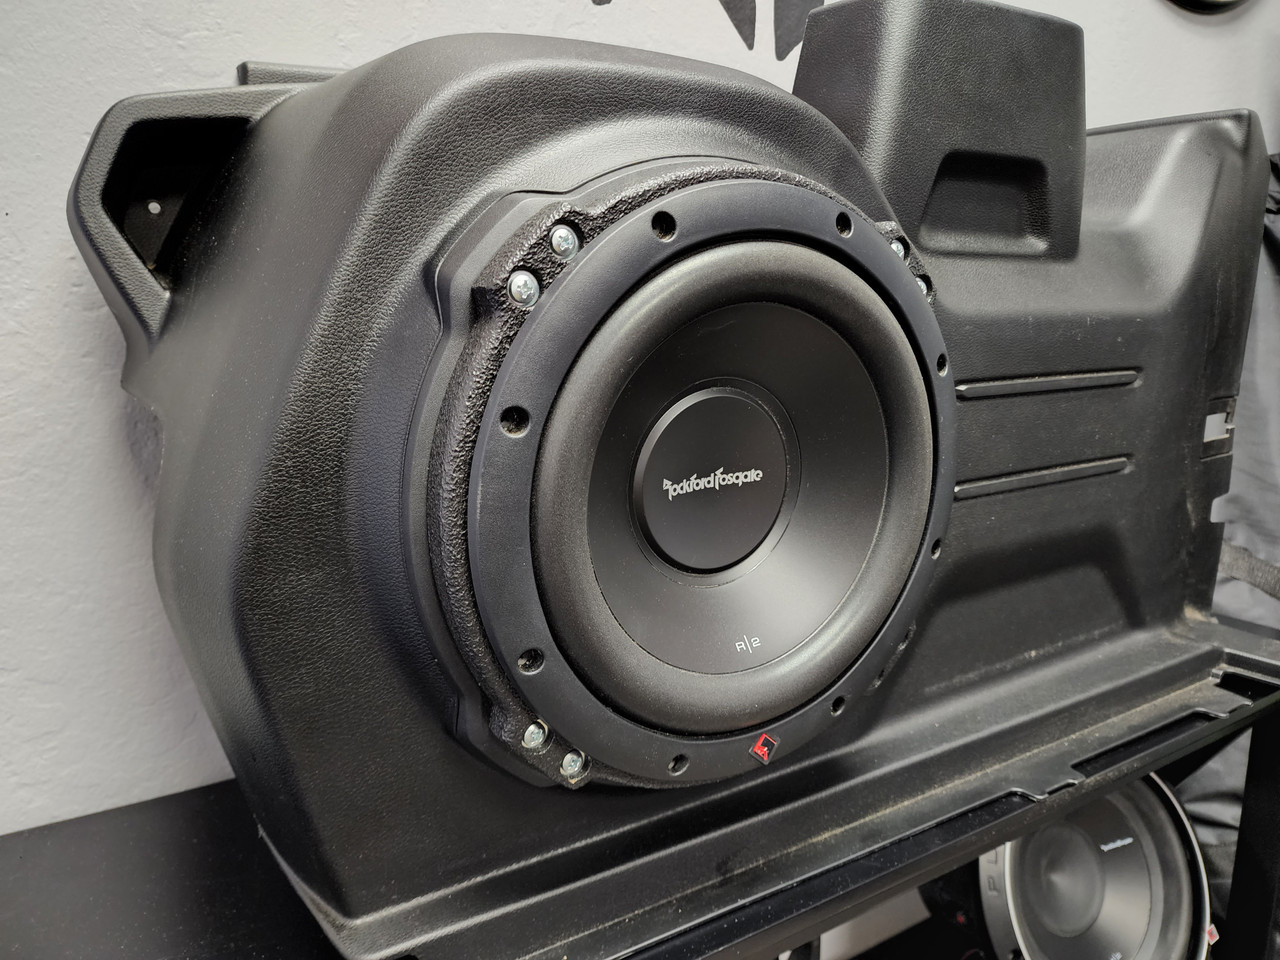 Jeep Wrangler JLU Alpine 10" Subwoofer Ring Adapter, Subwoofer And Amplifier Combo